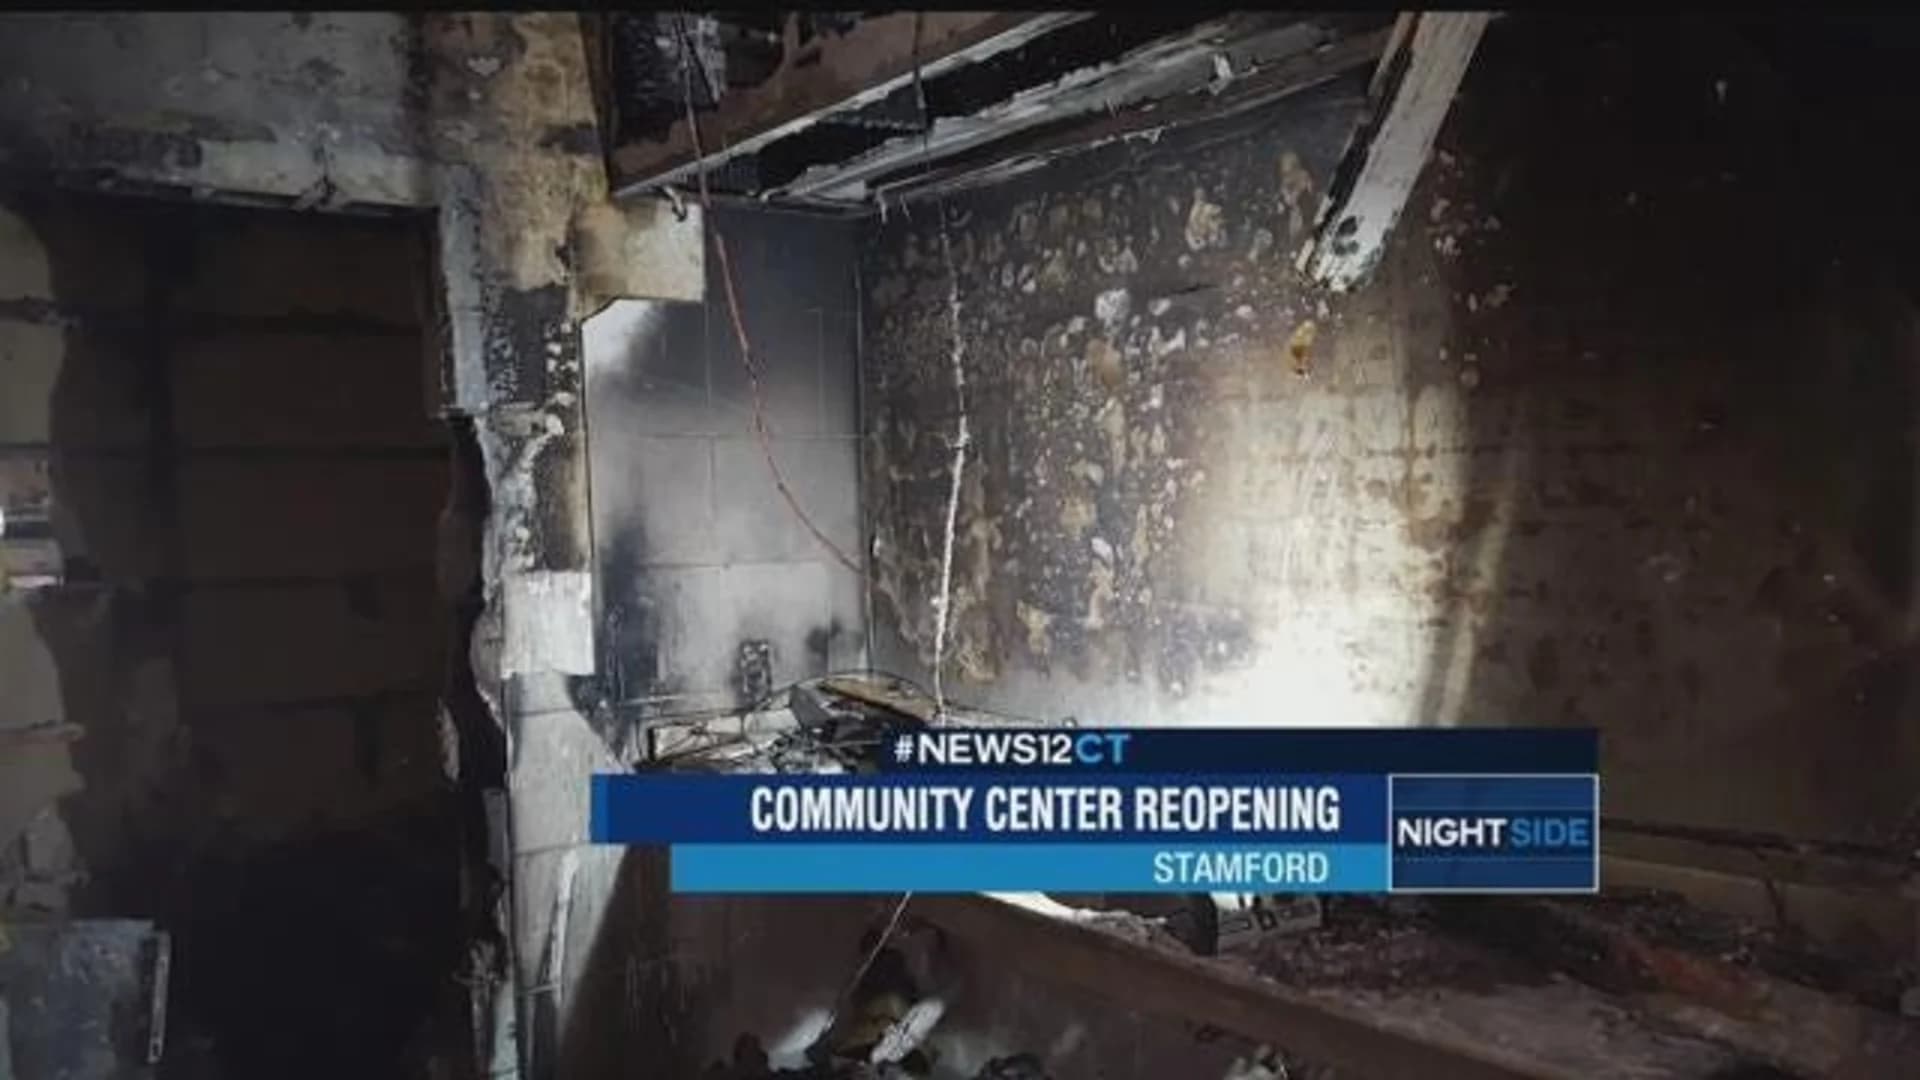 Italian Center of Stamford working to reopen after fire